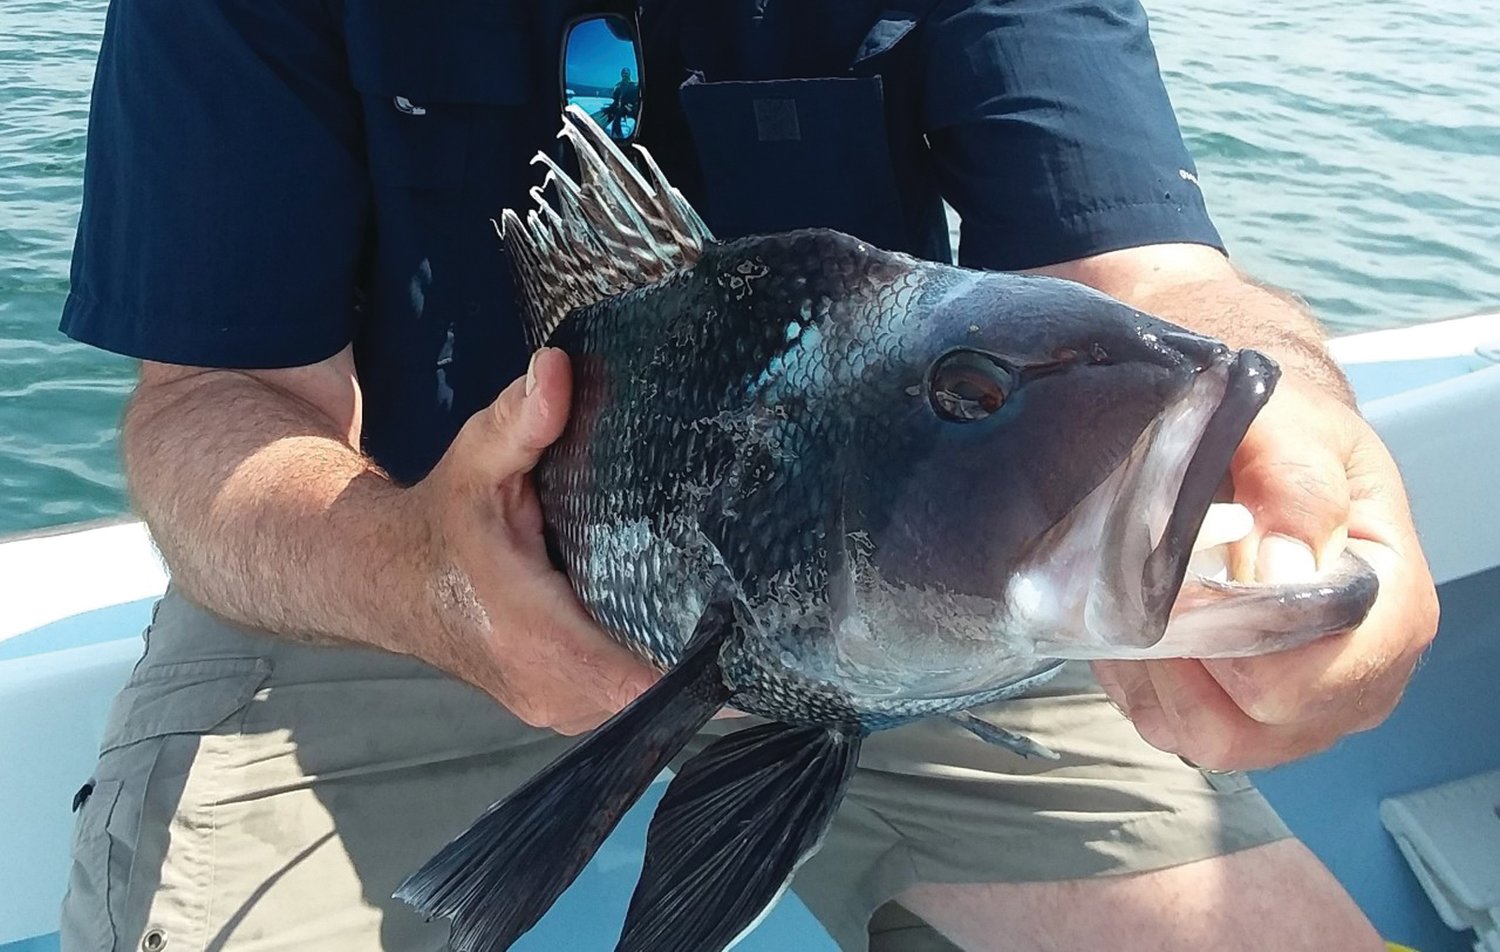 SEA BASS: Black sea bass regulations are likely to become more conservative this year as the recreational harvest limit has been reduced about ten percent coastwide. (Submitted photo)